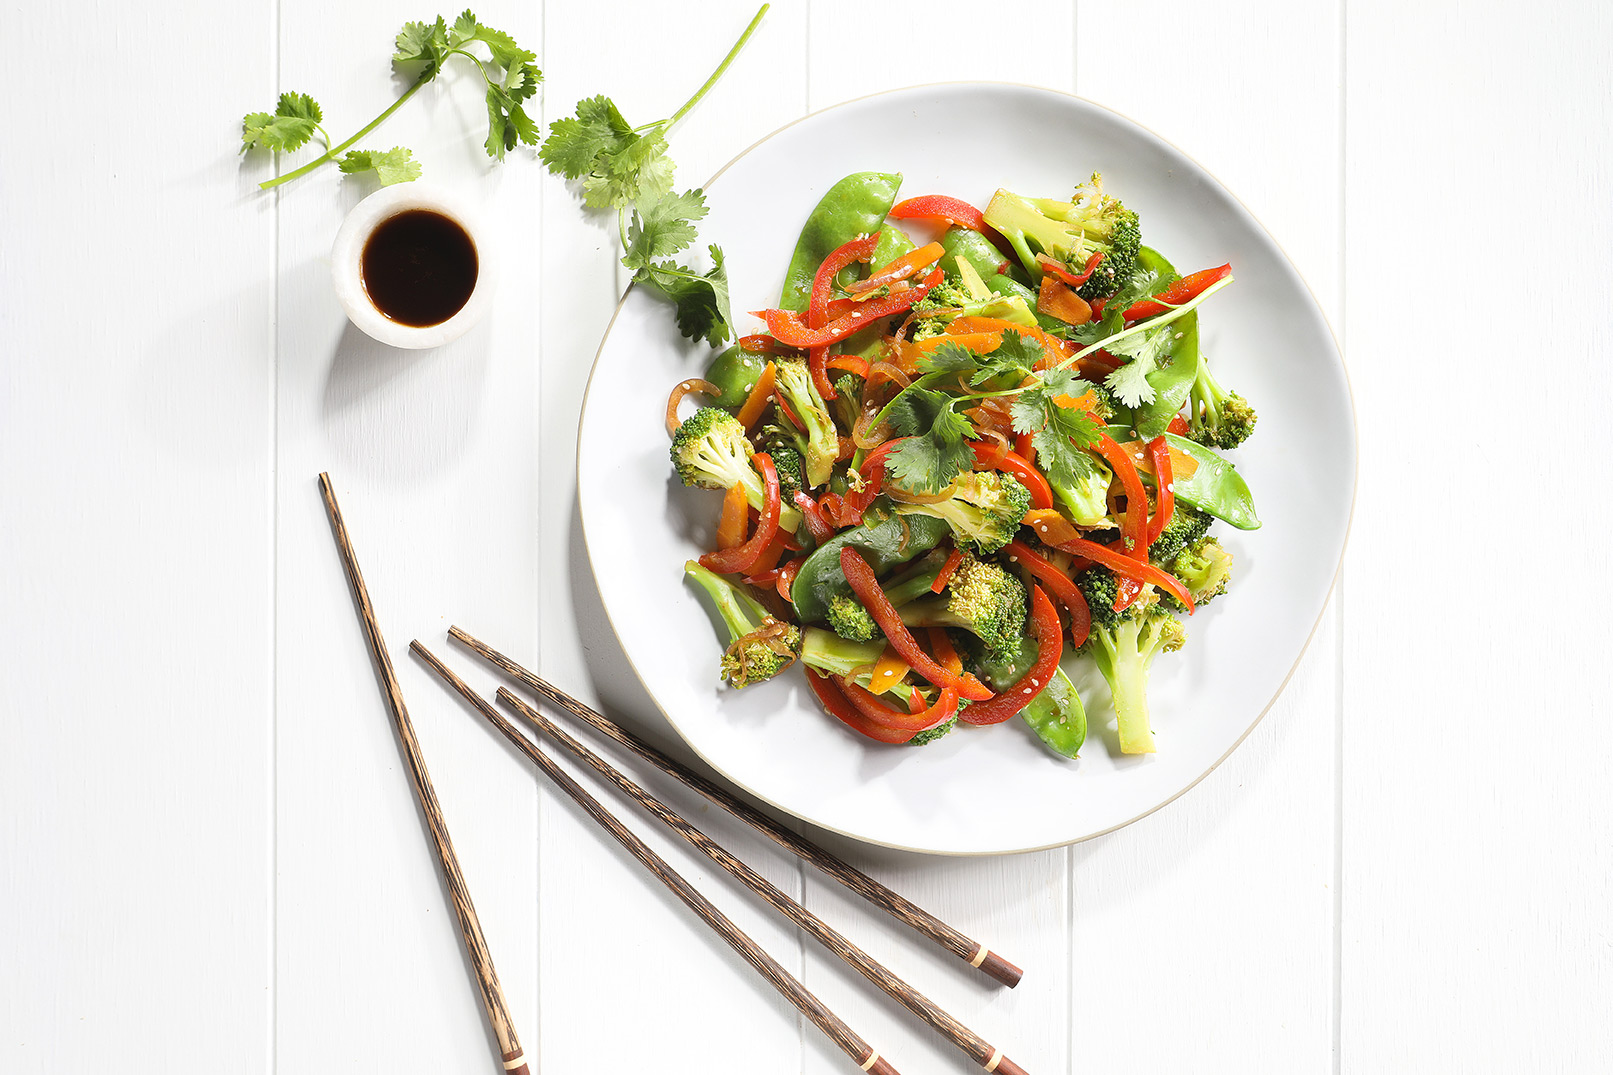 Image of stir fry vegetables on a large white plate with herbs, dressing and wooden chopsticks on the side